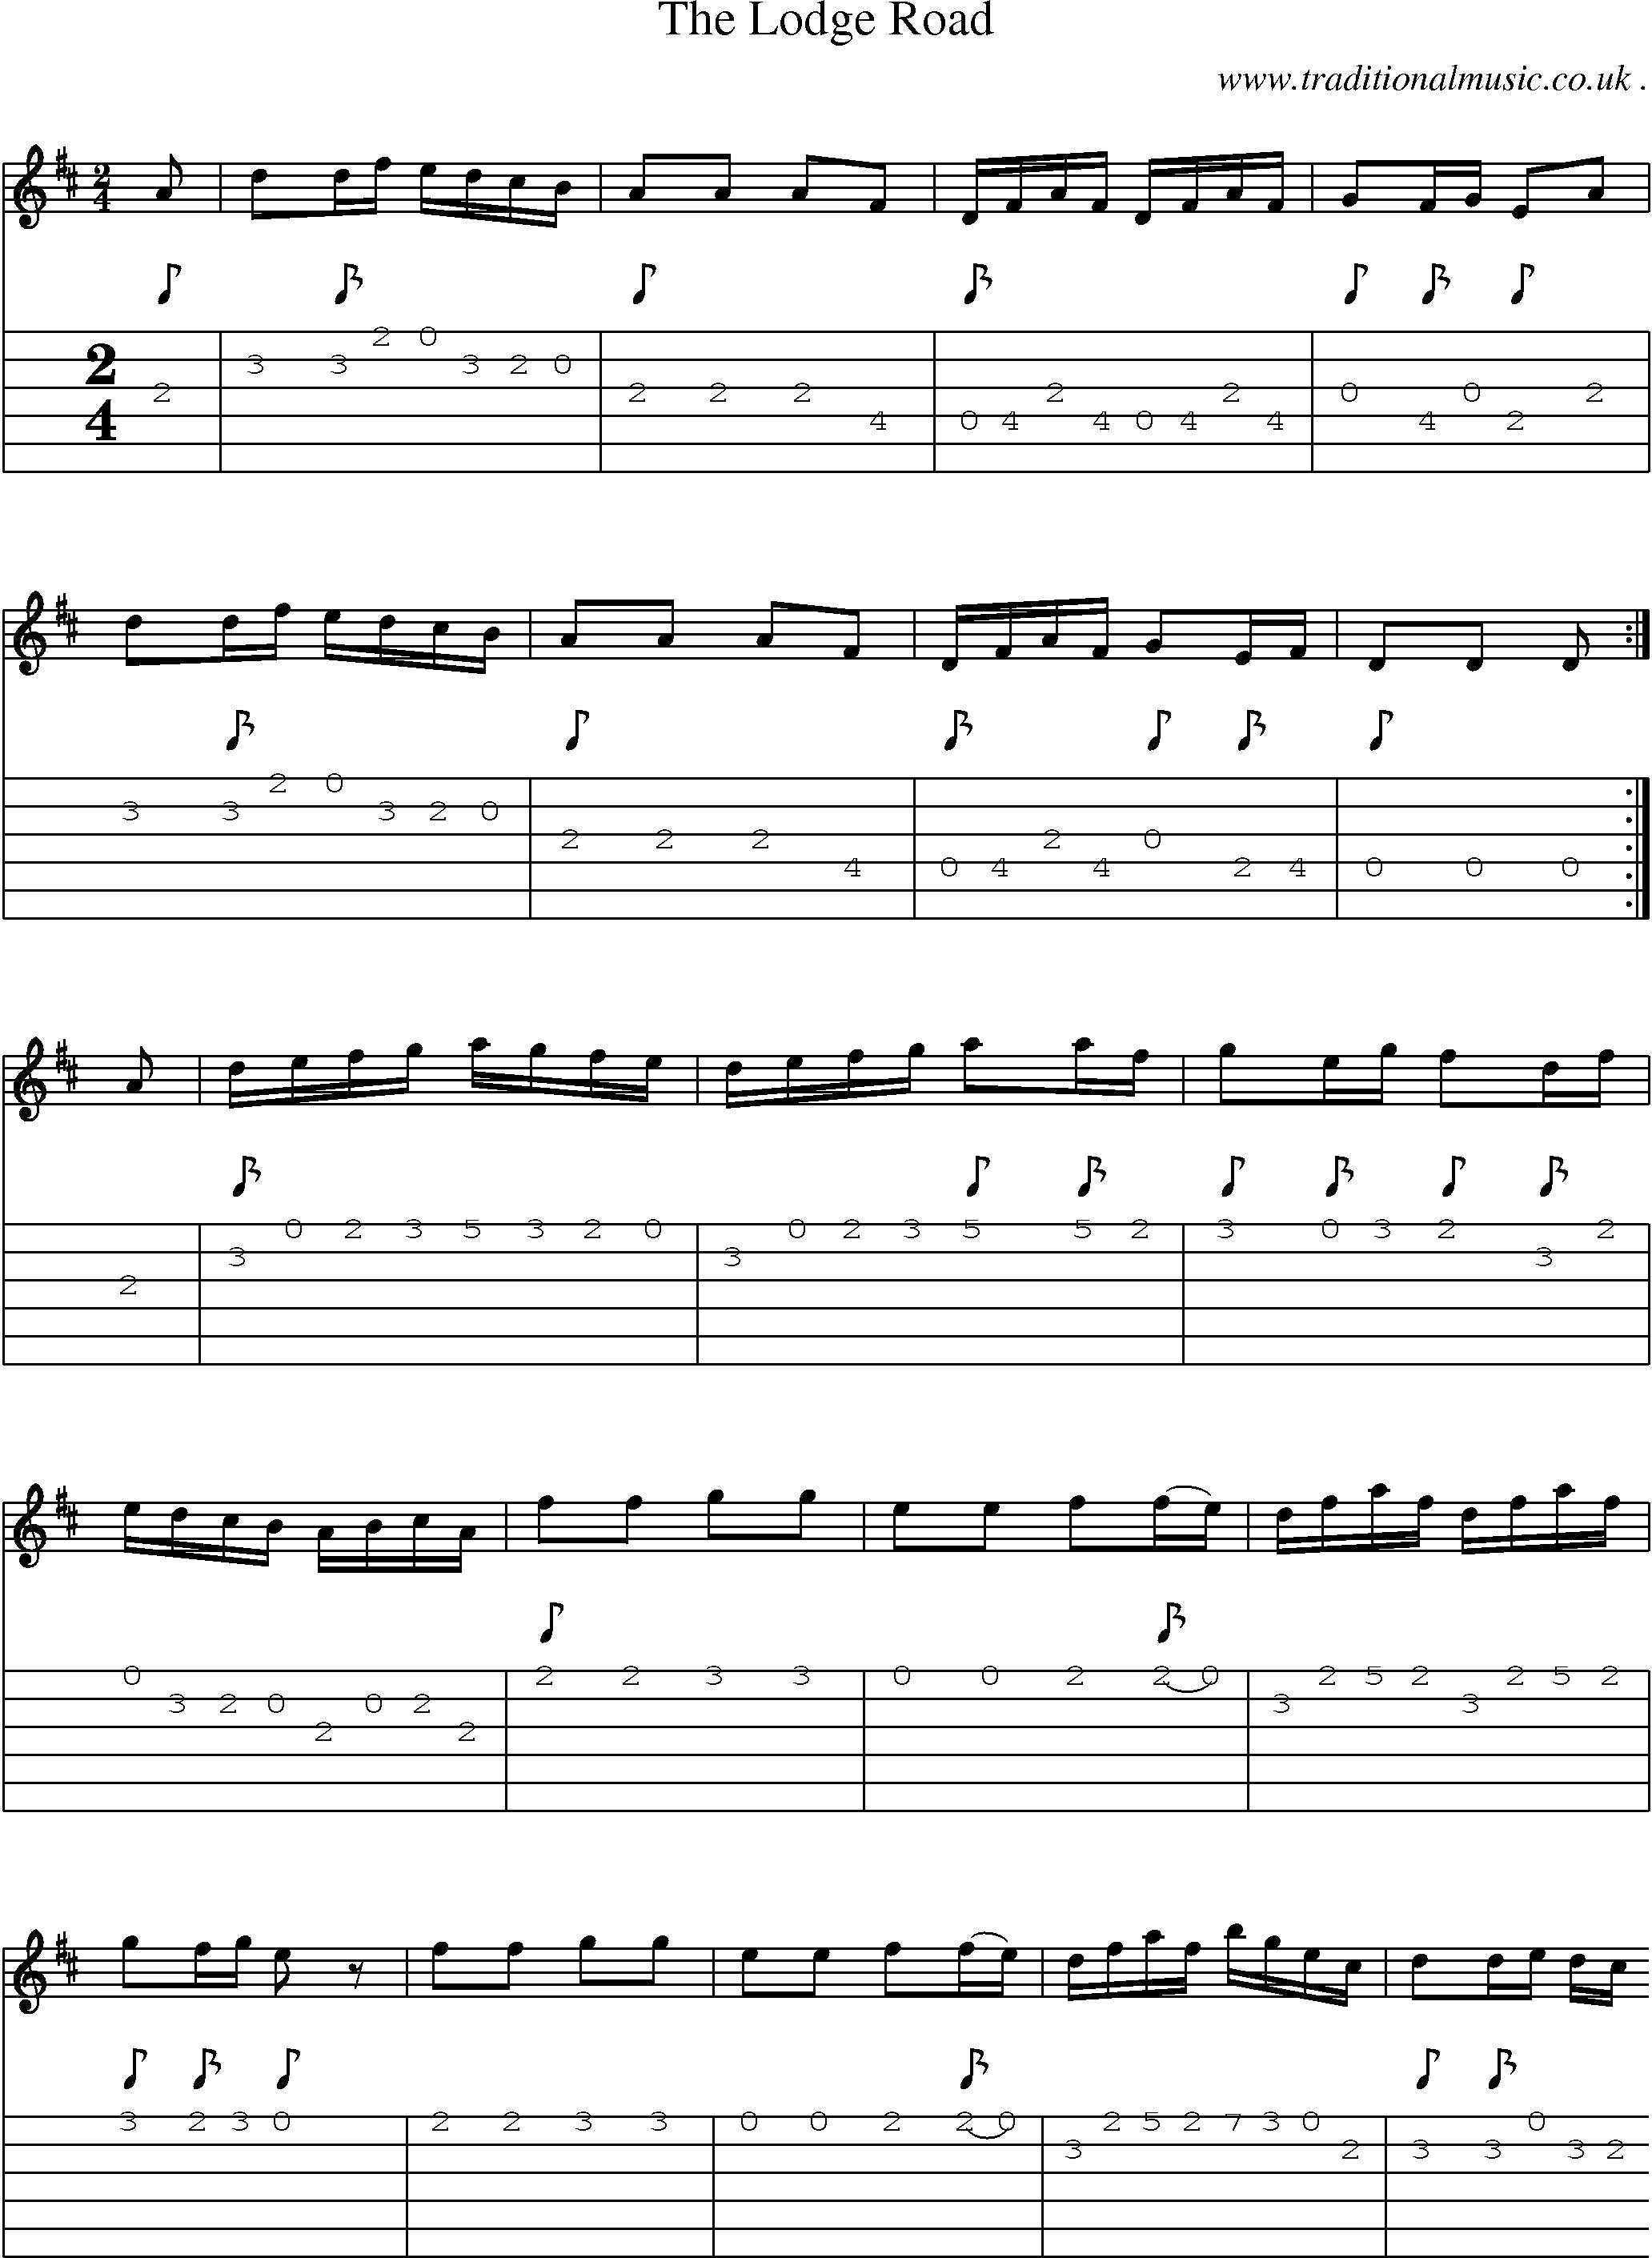 Sheet-Music and Guitar Tabs for The Lodge Road